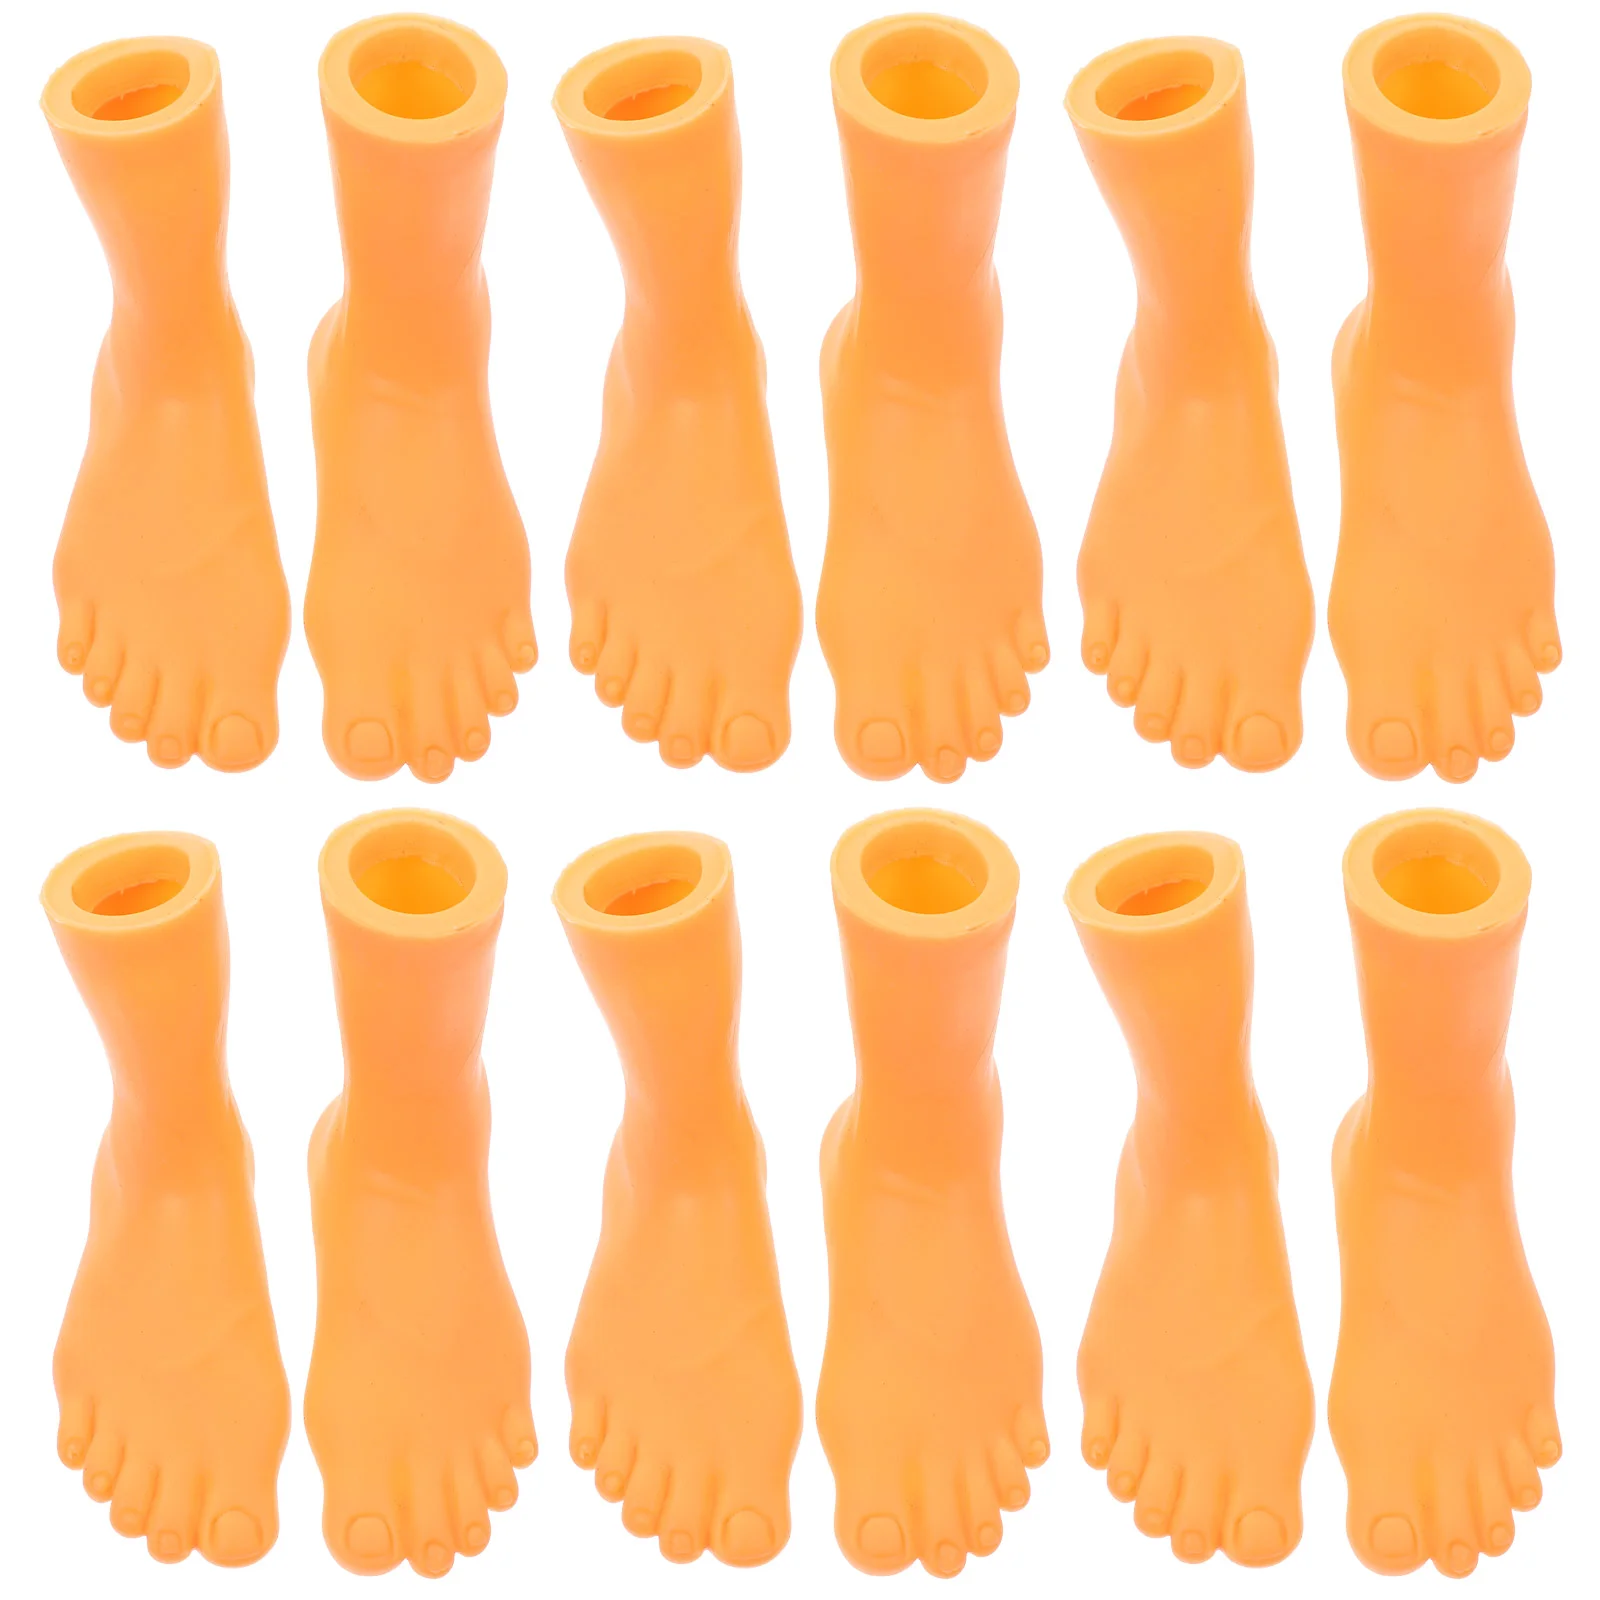 

6 Pairs Finger Booties Puppets Baby Foot Model Kids Educational Toys Set Interactive Vinyl Small Toddler Left Right Infant Bath